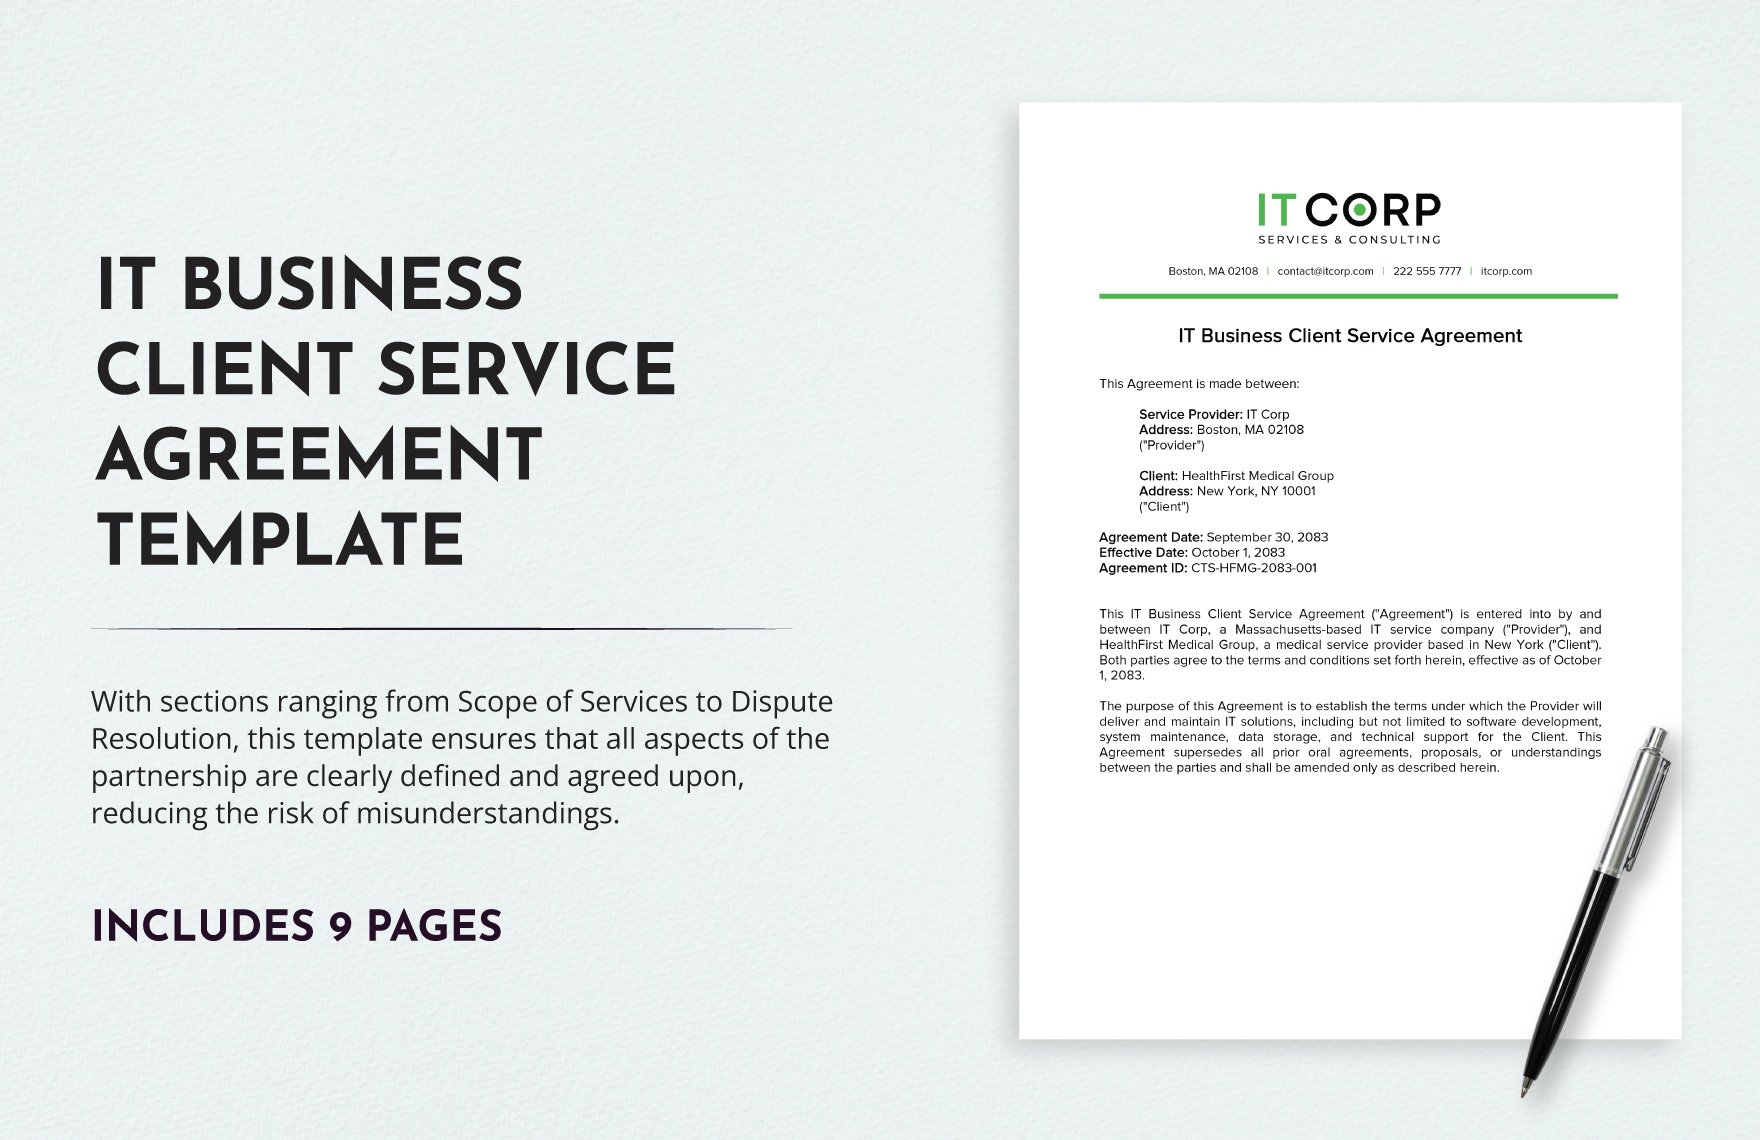 IT Business Client Service Agreement Template